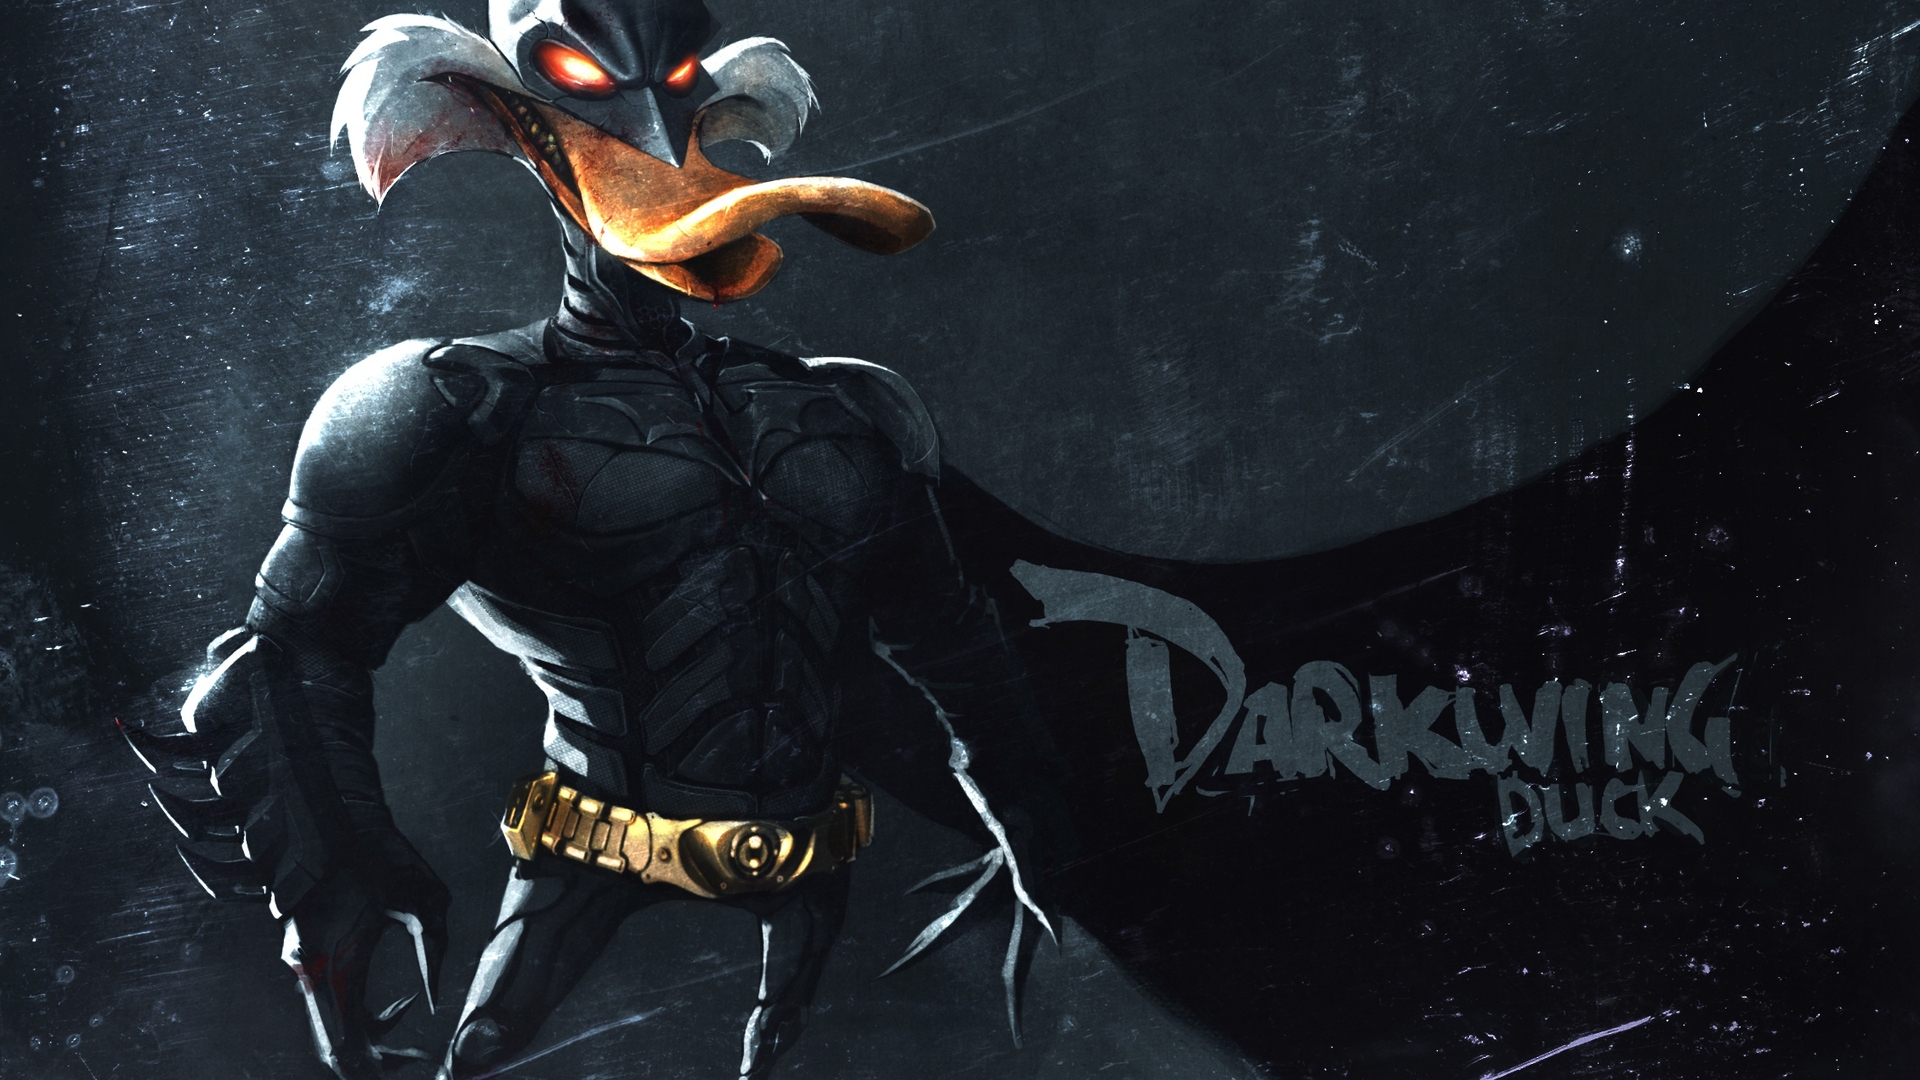 Darkwing Duck Mask for 1920 x 1080 HDTV 1080p resolution